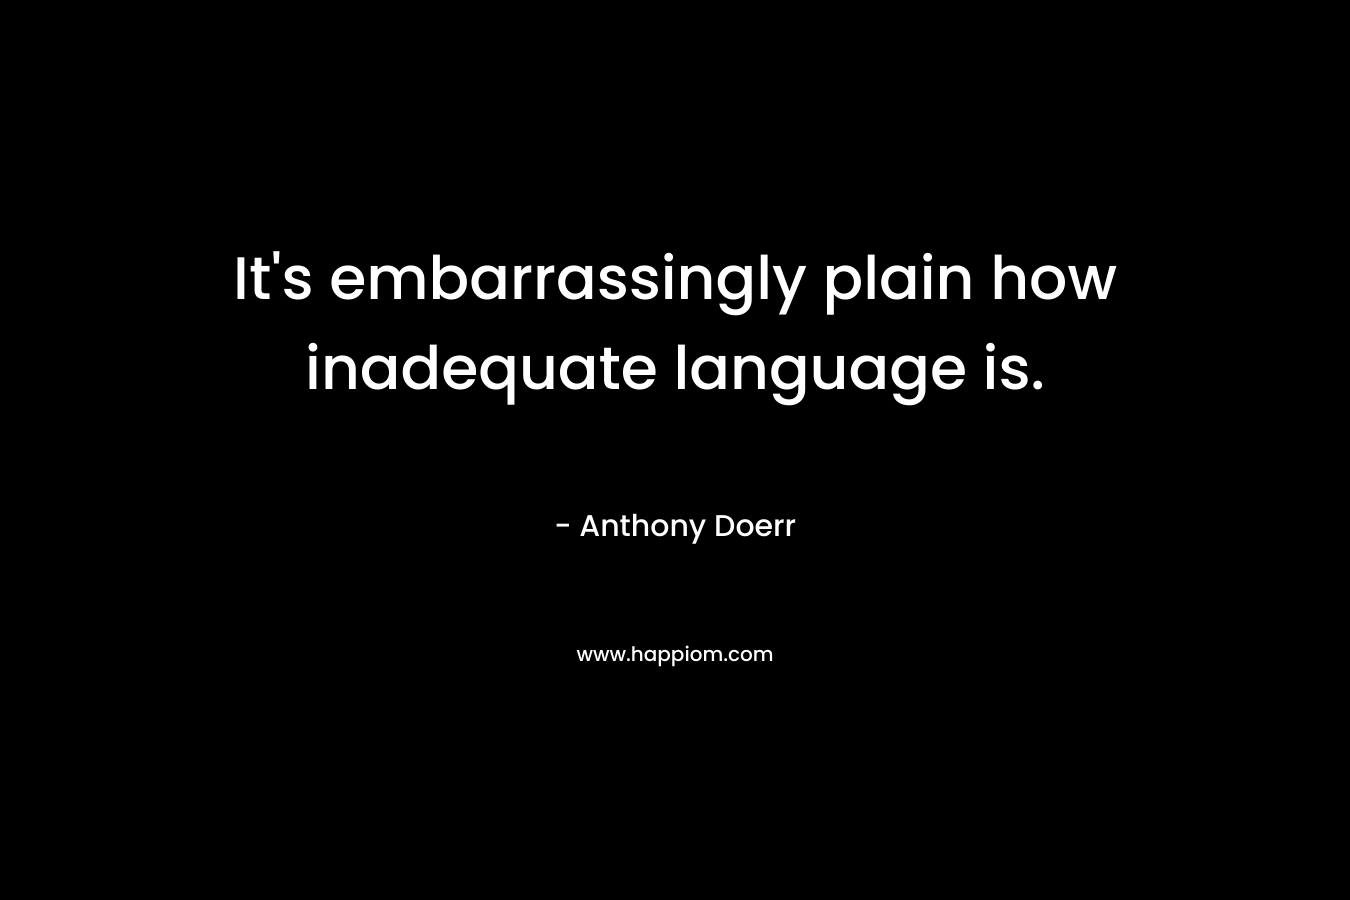 It’s embarrassingly plain how inadequate language is. – Anthony Doerr